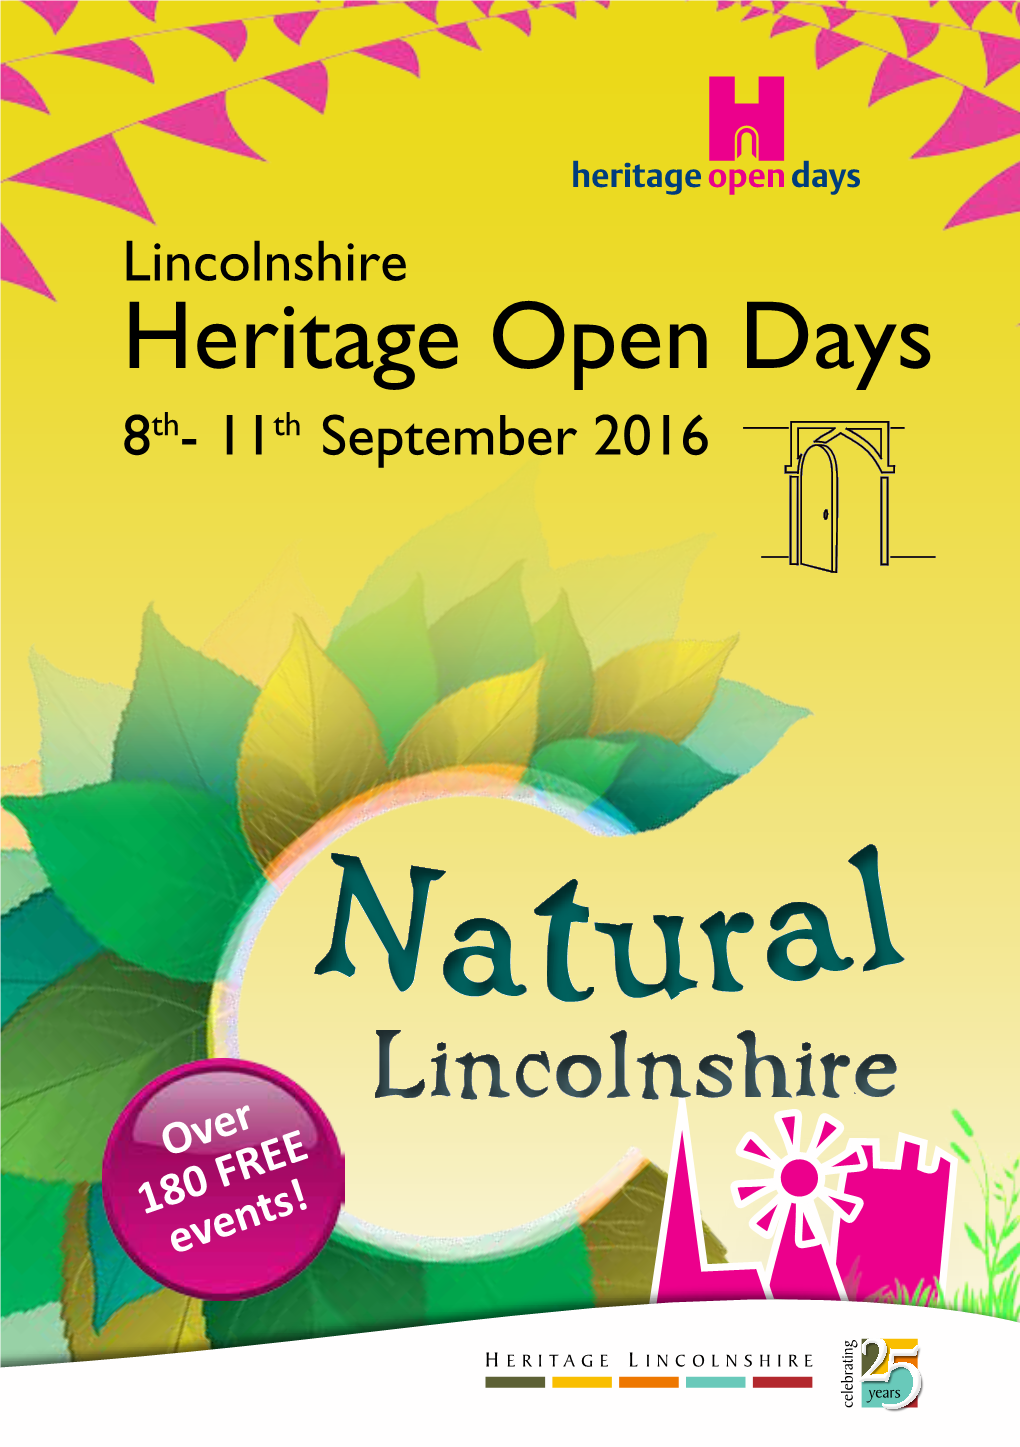 Natural Lincolnshire Over 180 FREE Events!